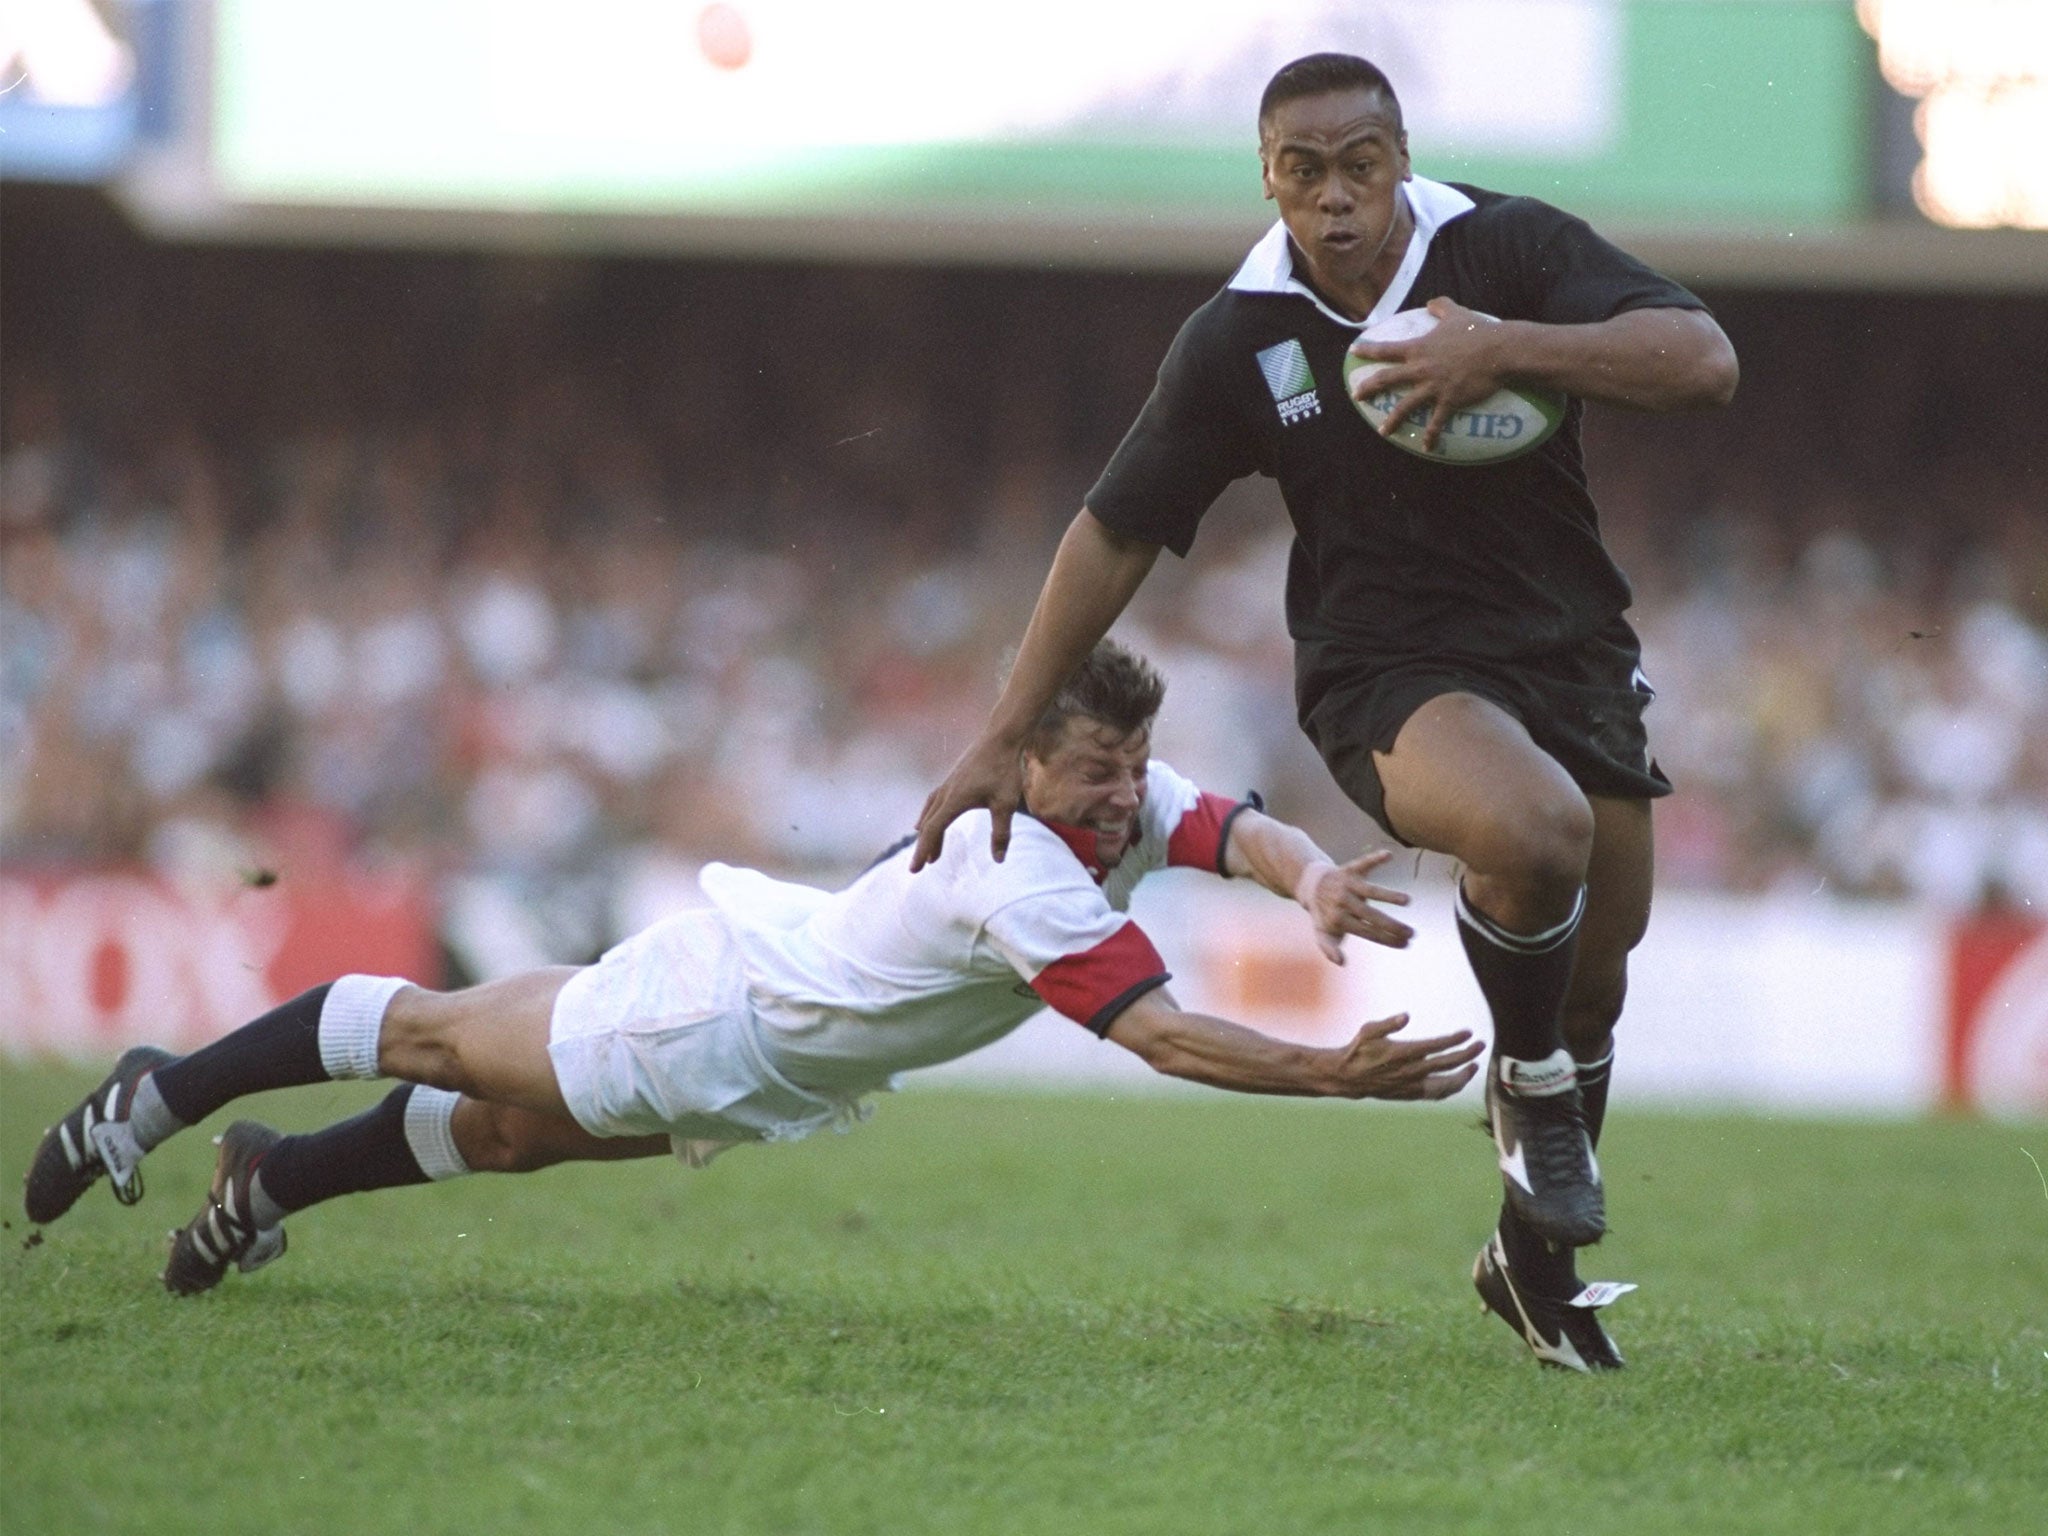 Stephen Prosser compared the man on the flight to rugby legend Jonah Lomu